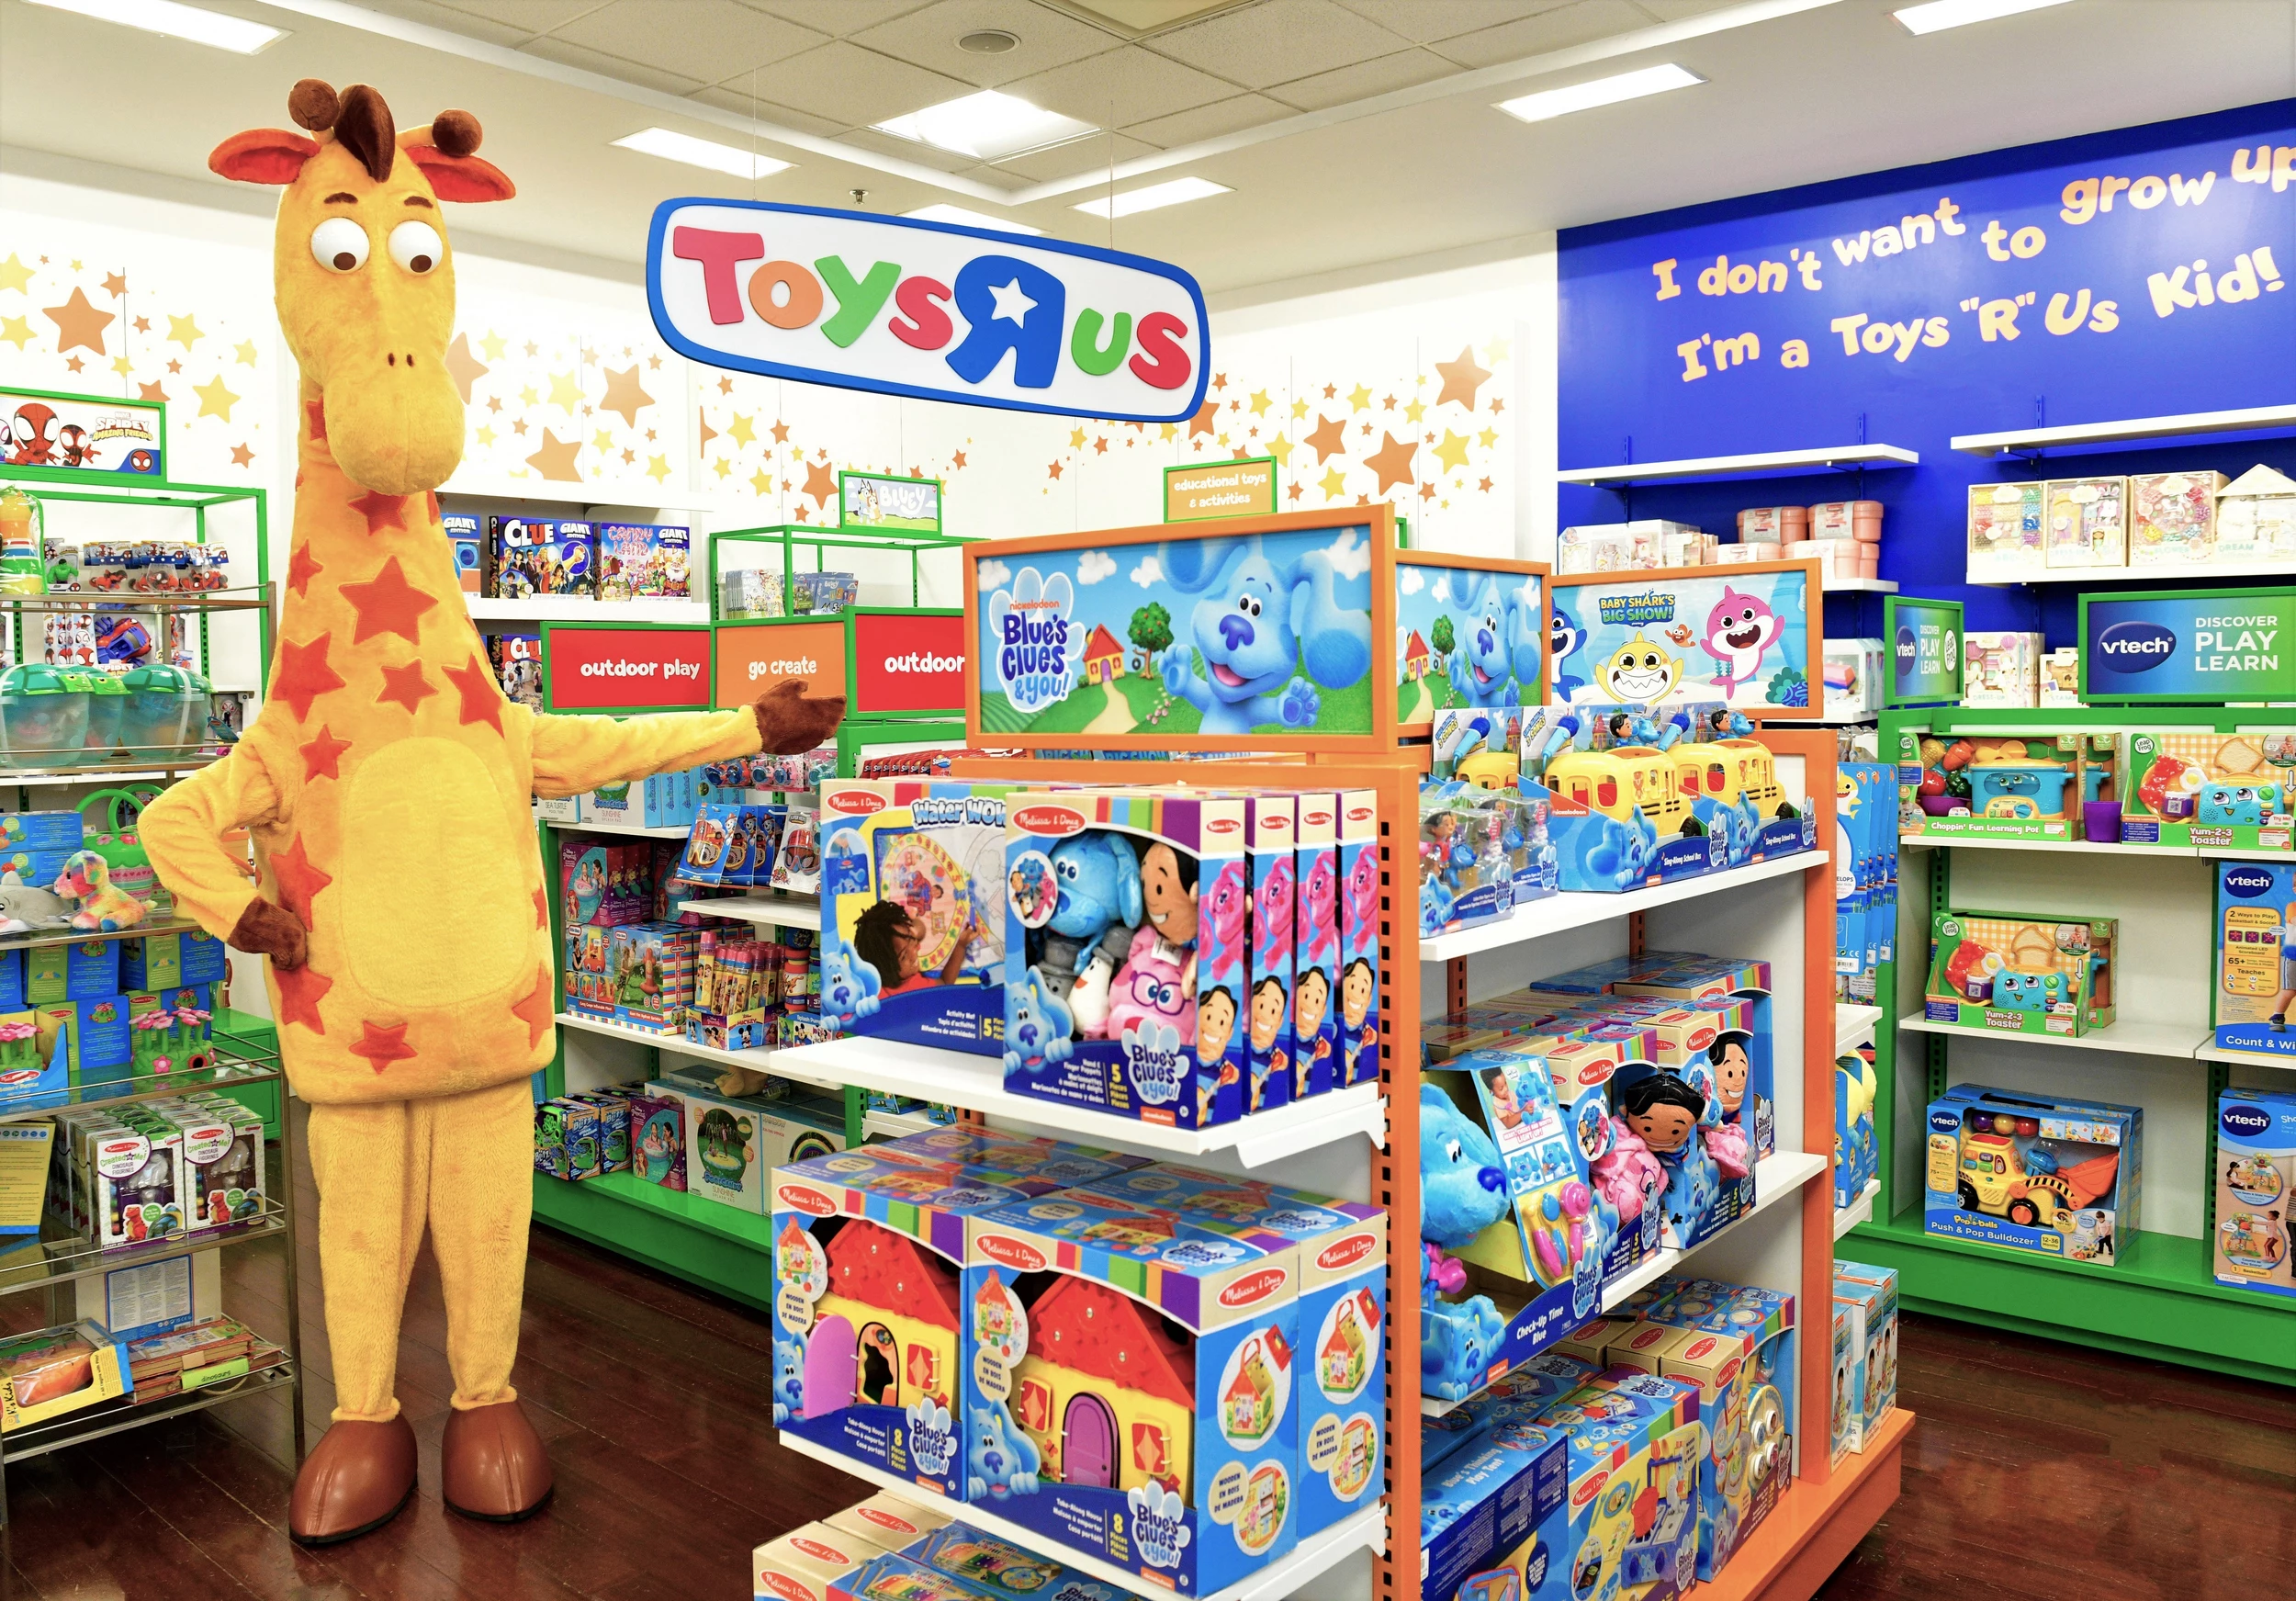 Ocean County Are We Ready For Toys R' Us to Return?